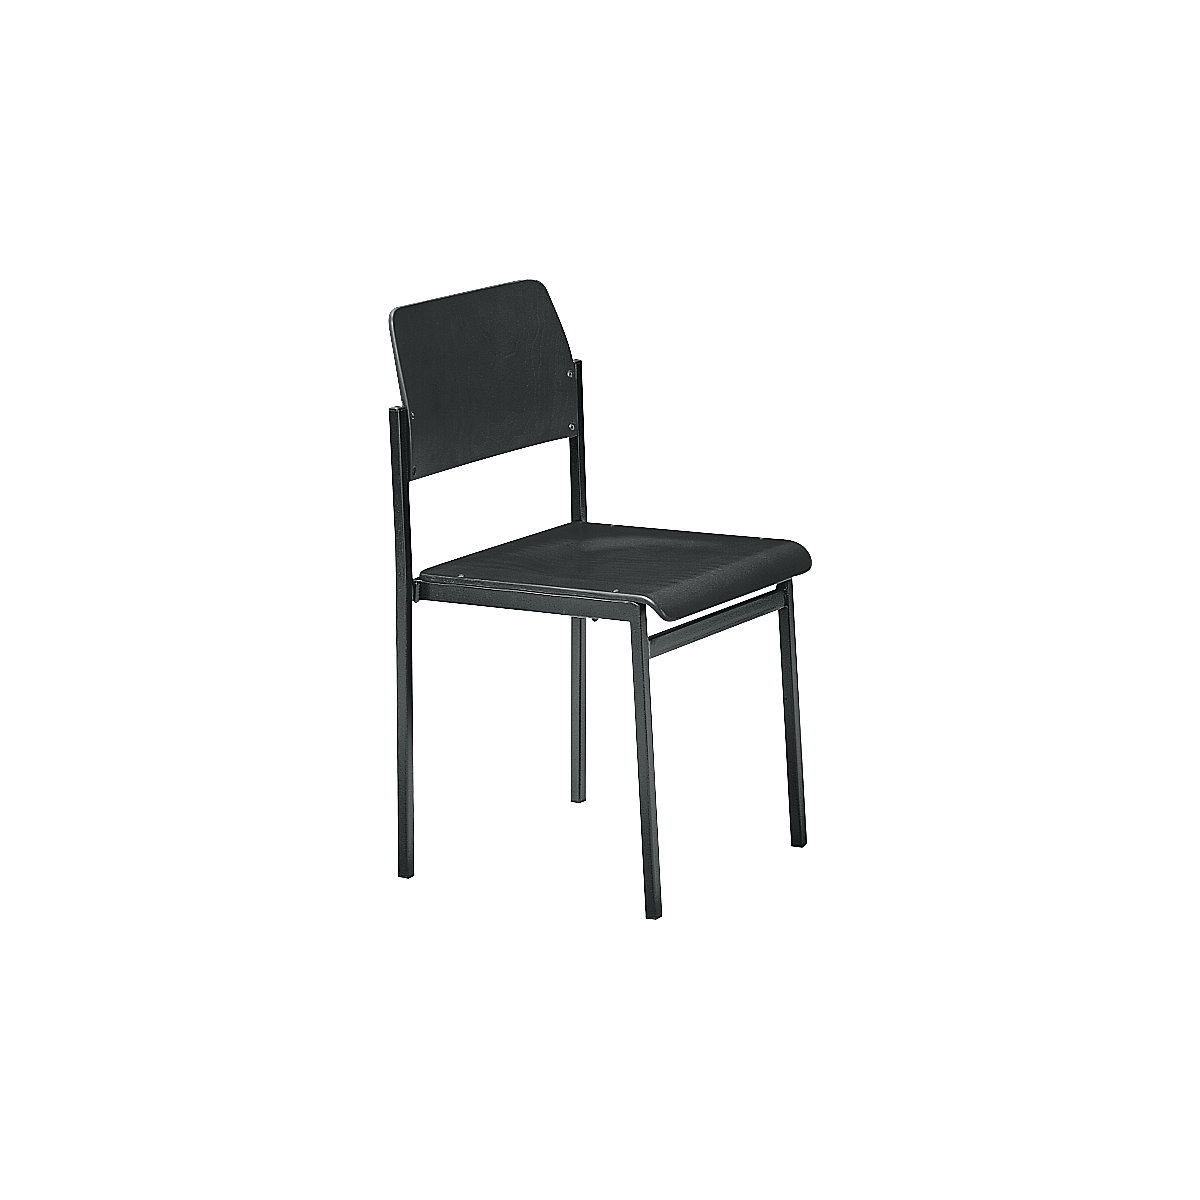 SUSAN stacking chair, powder coated frame, pack of 4, wood in charcoal-4